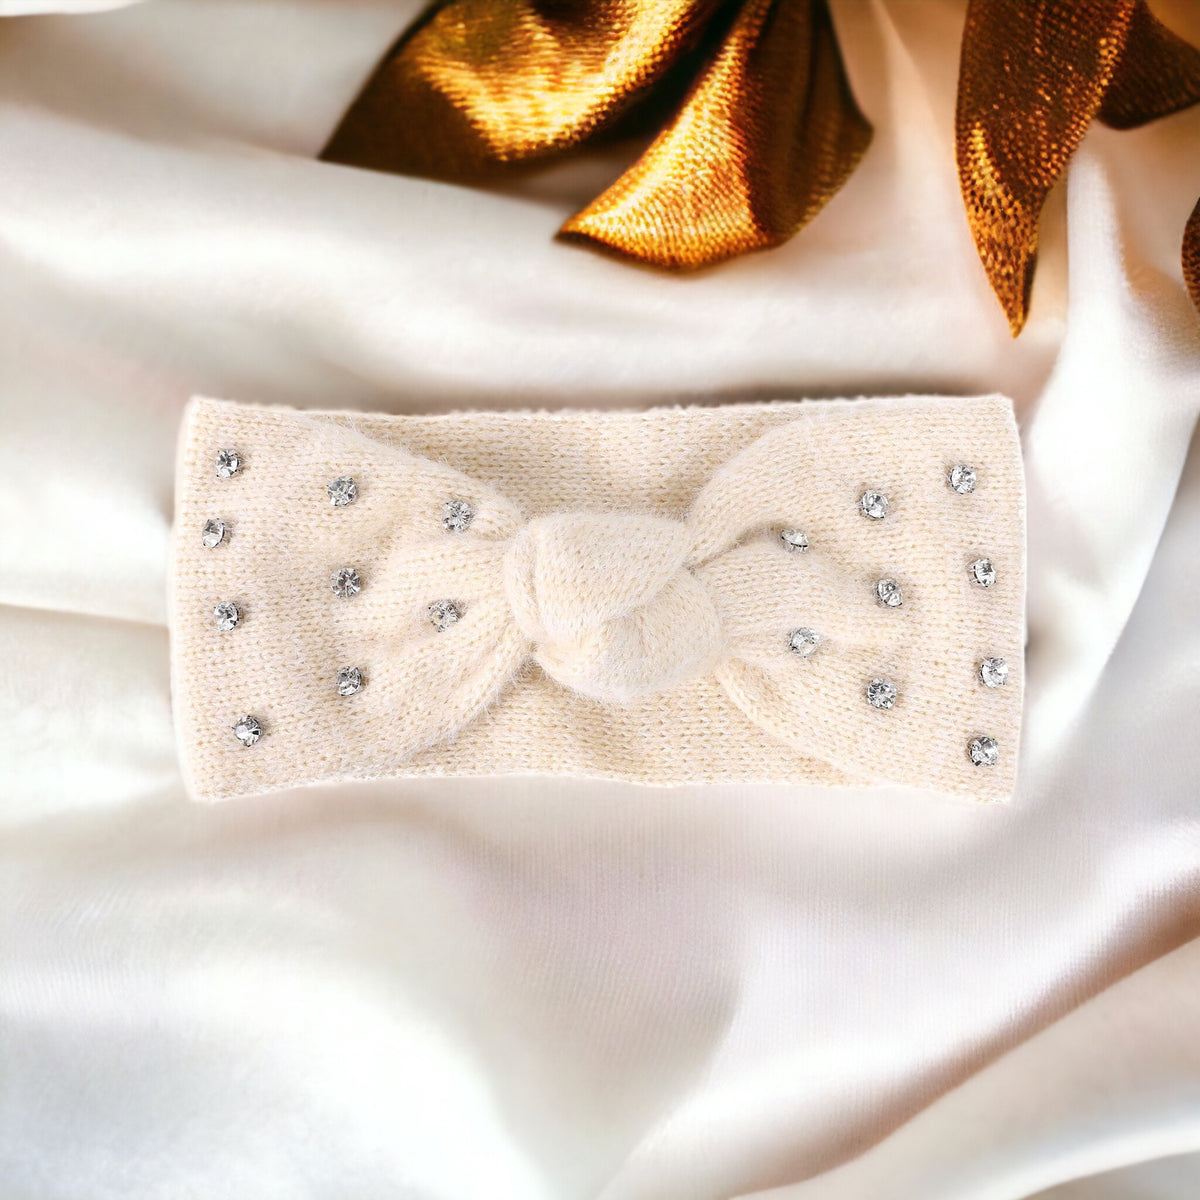 Angola Feel Rhinestone Bow Ear Warm Headband - Ivory-260 Other Accessories-FASHION FANTASIA-Coastal Bloom Boutique, find the trendiest versions of the popular styles and looks Located in Indialantic, FL